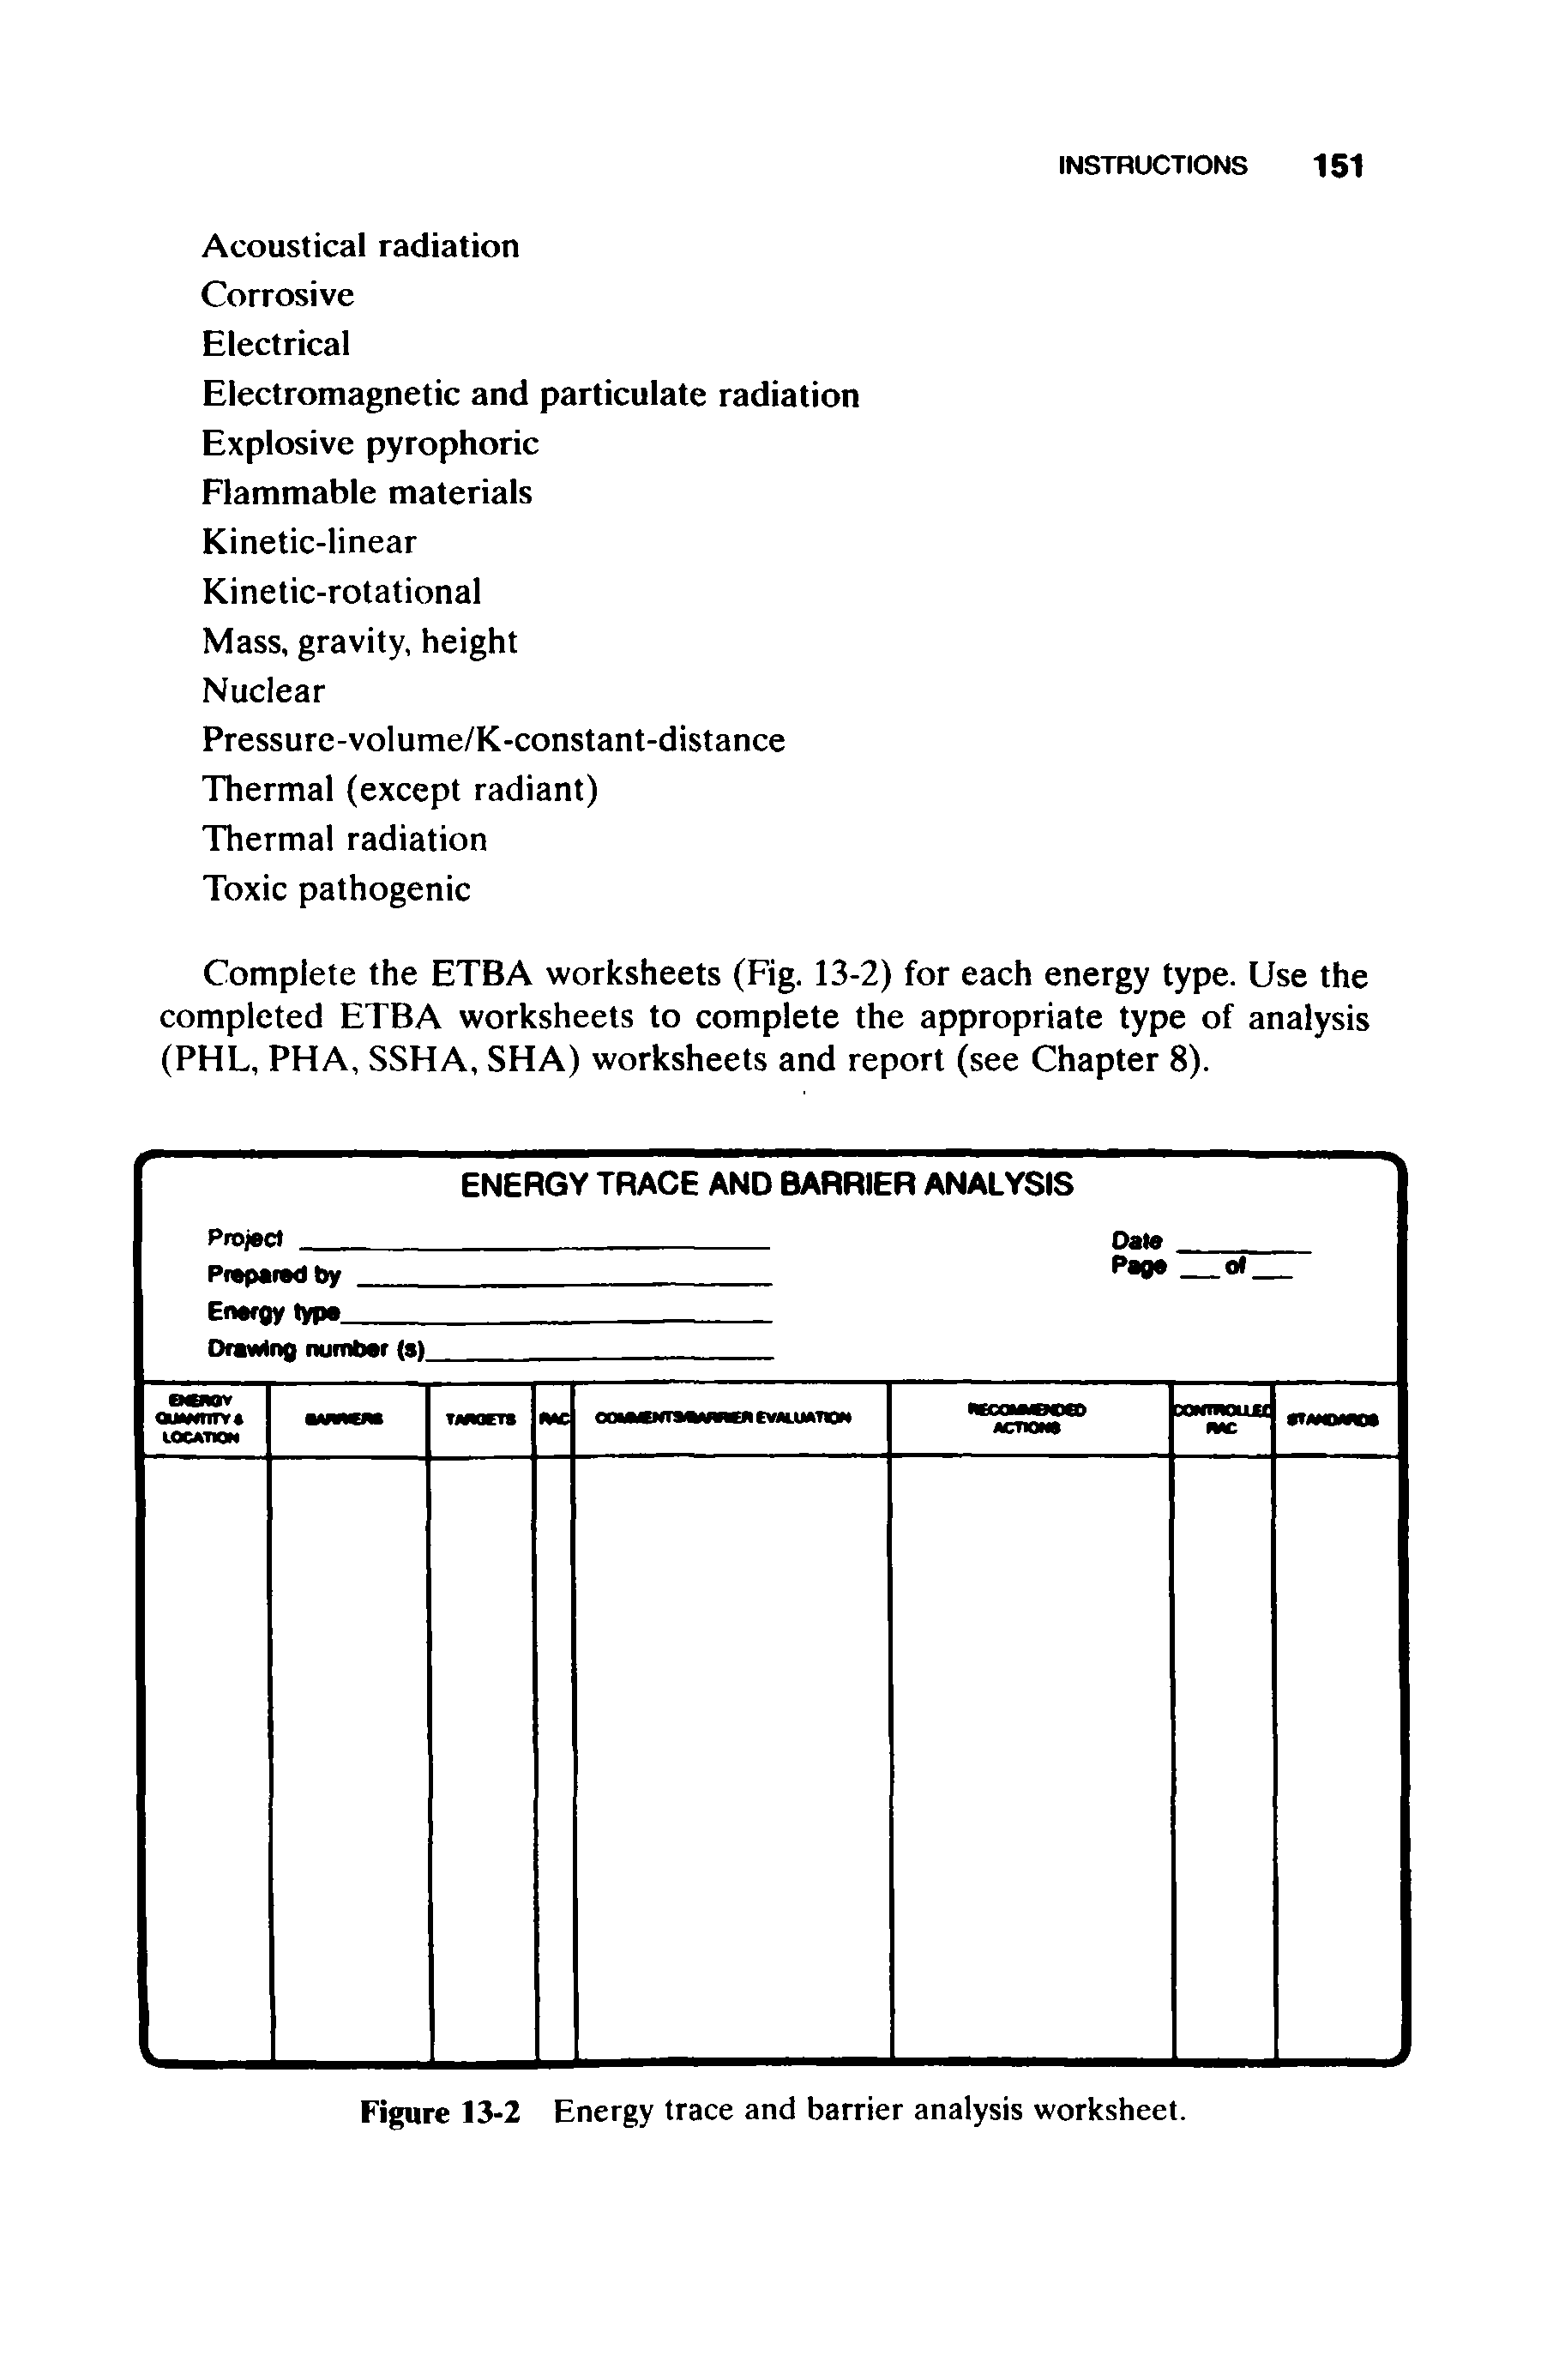 Figure 13-2 Energy trace and barrier analysis worksheet.